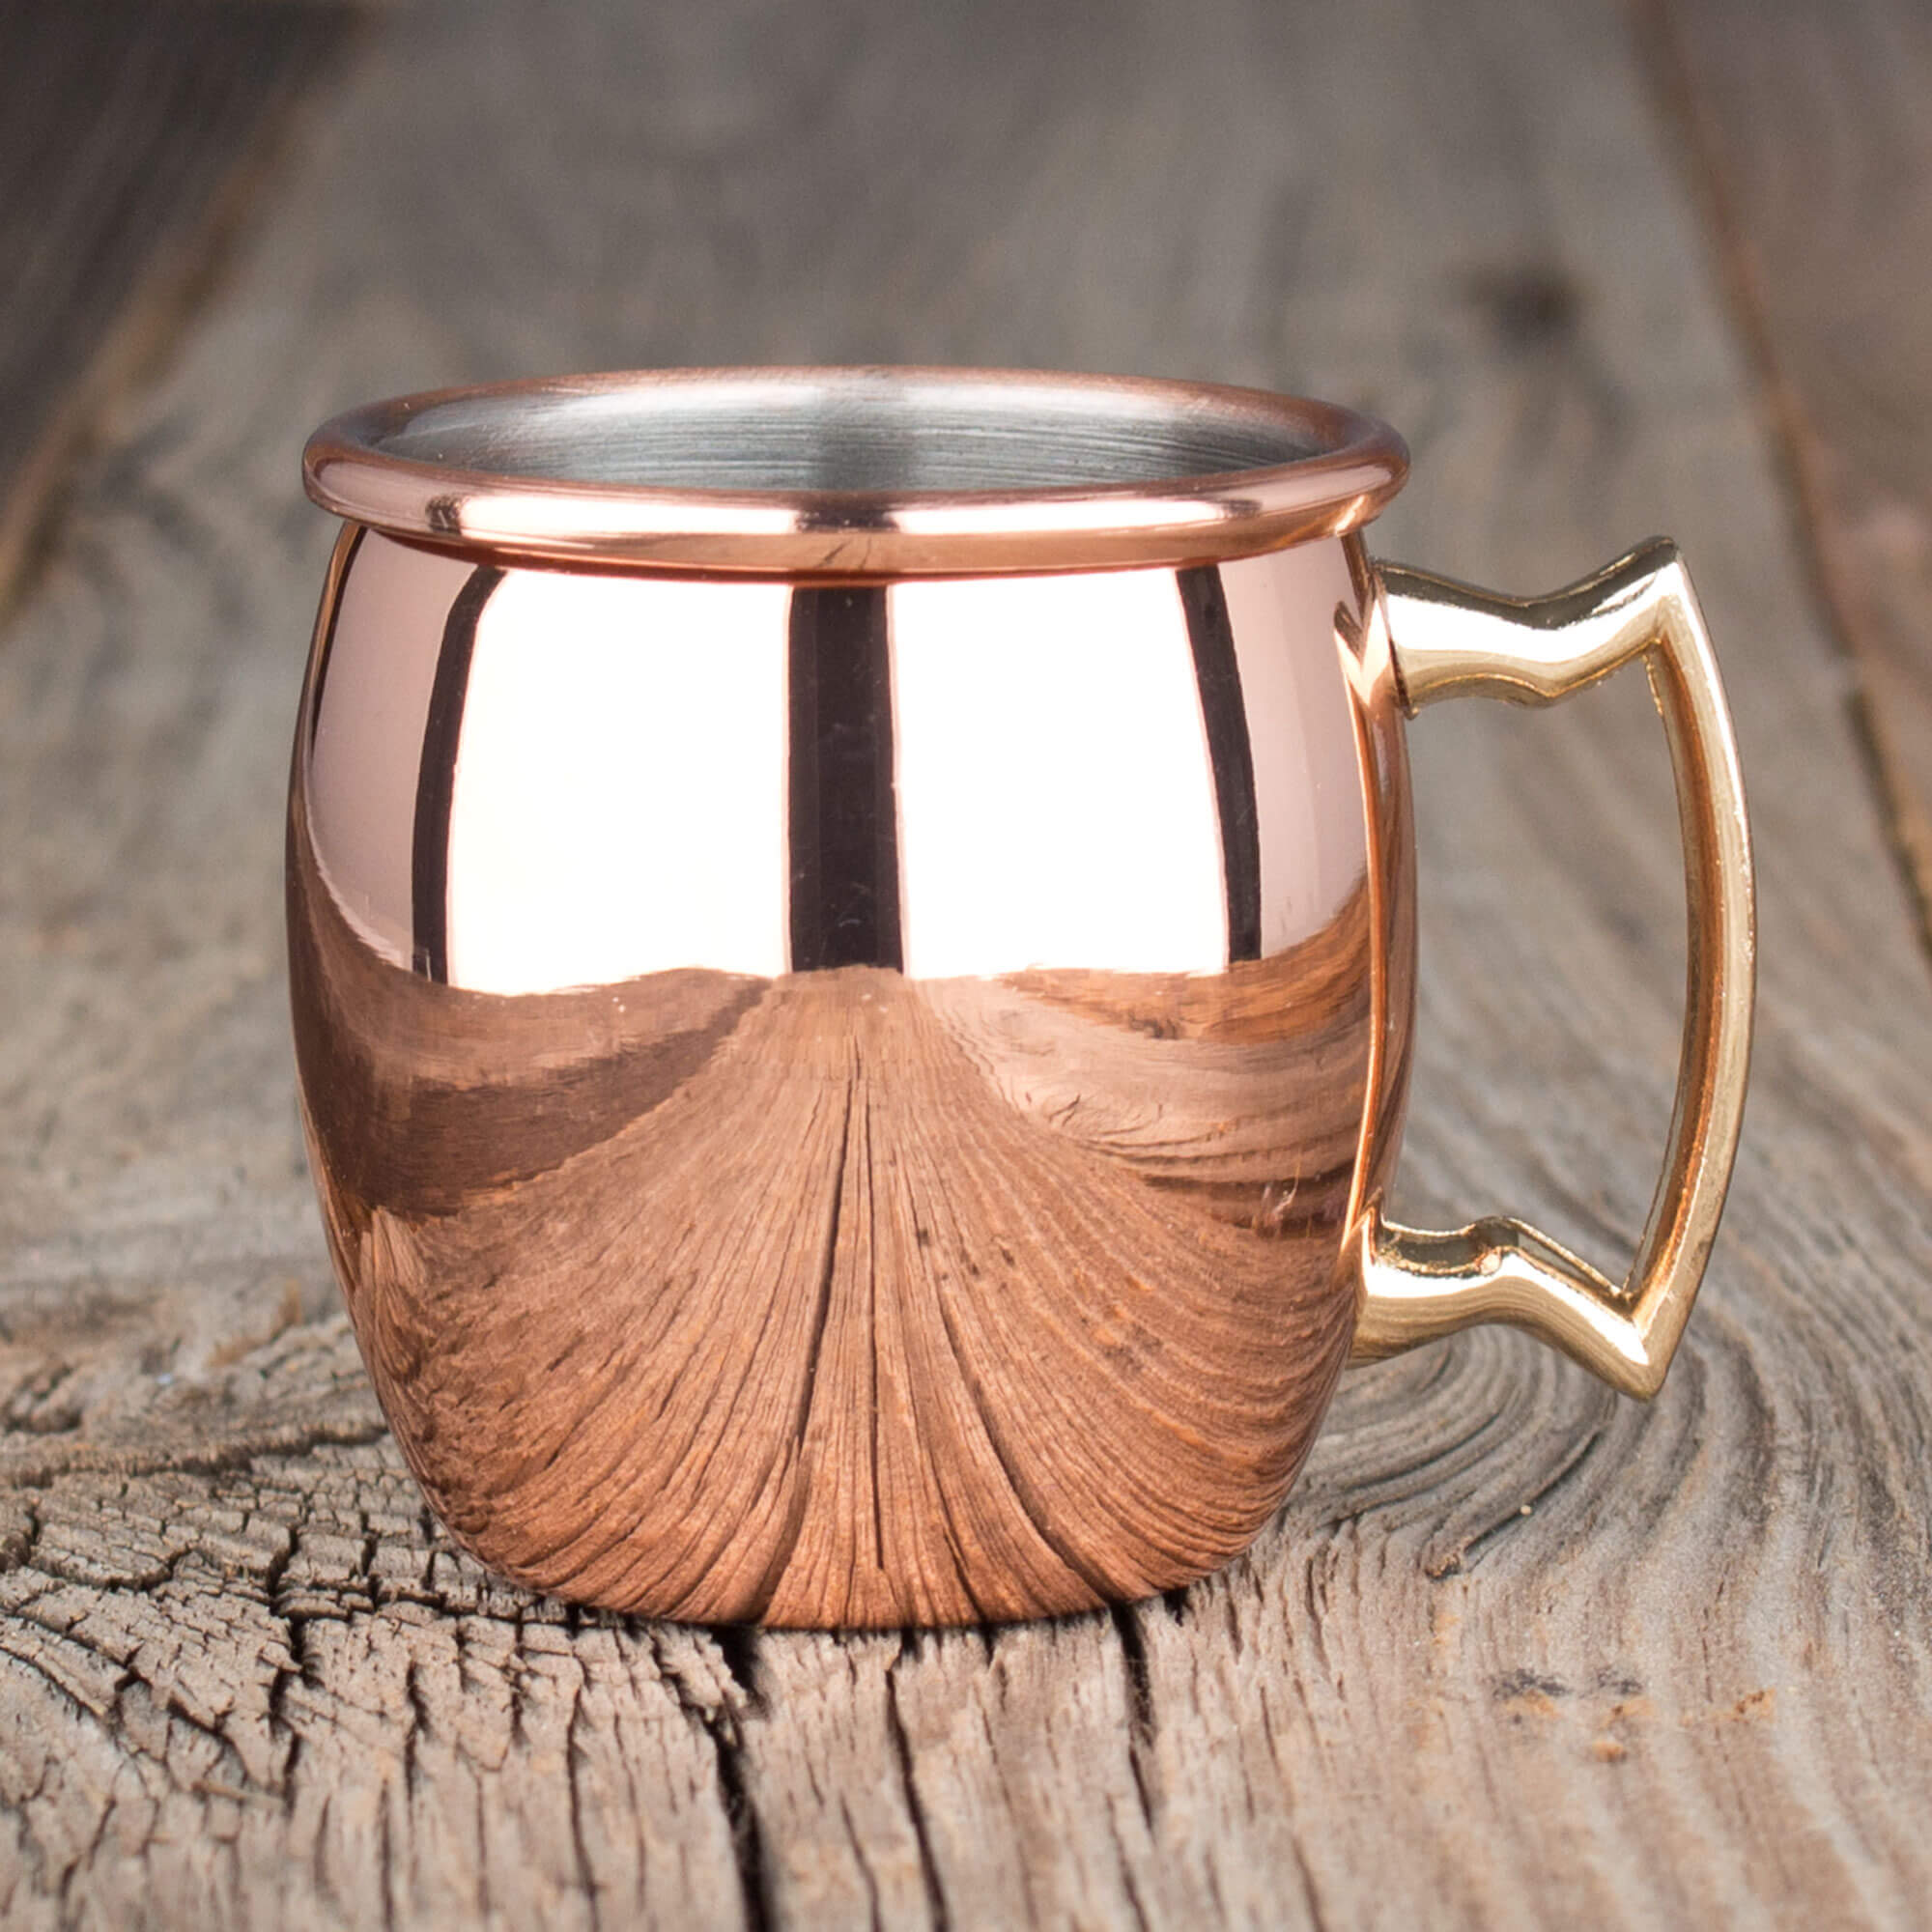 Shot glass / mini Moscow Mule mug, stainless steel copper-colored - approx. 60ml